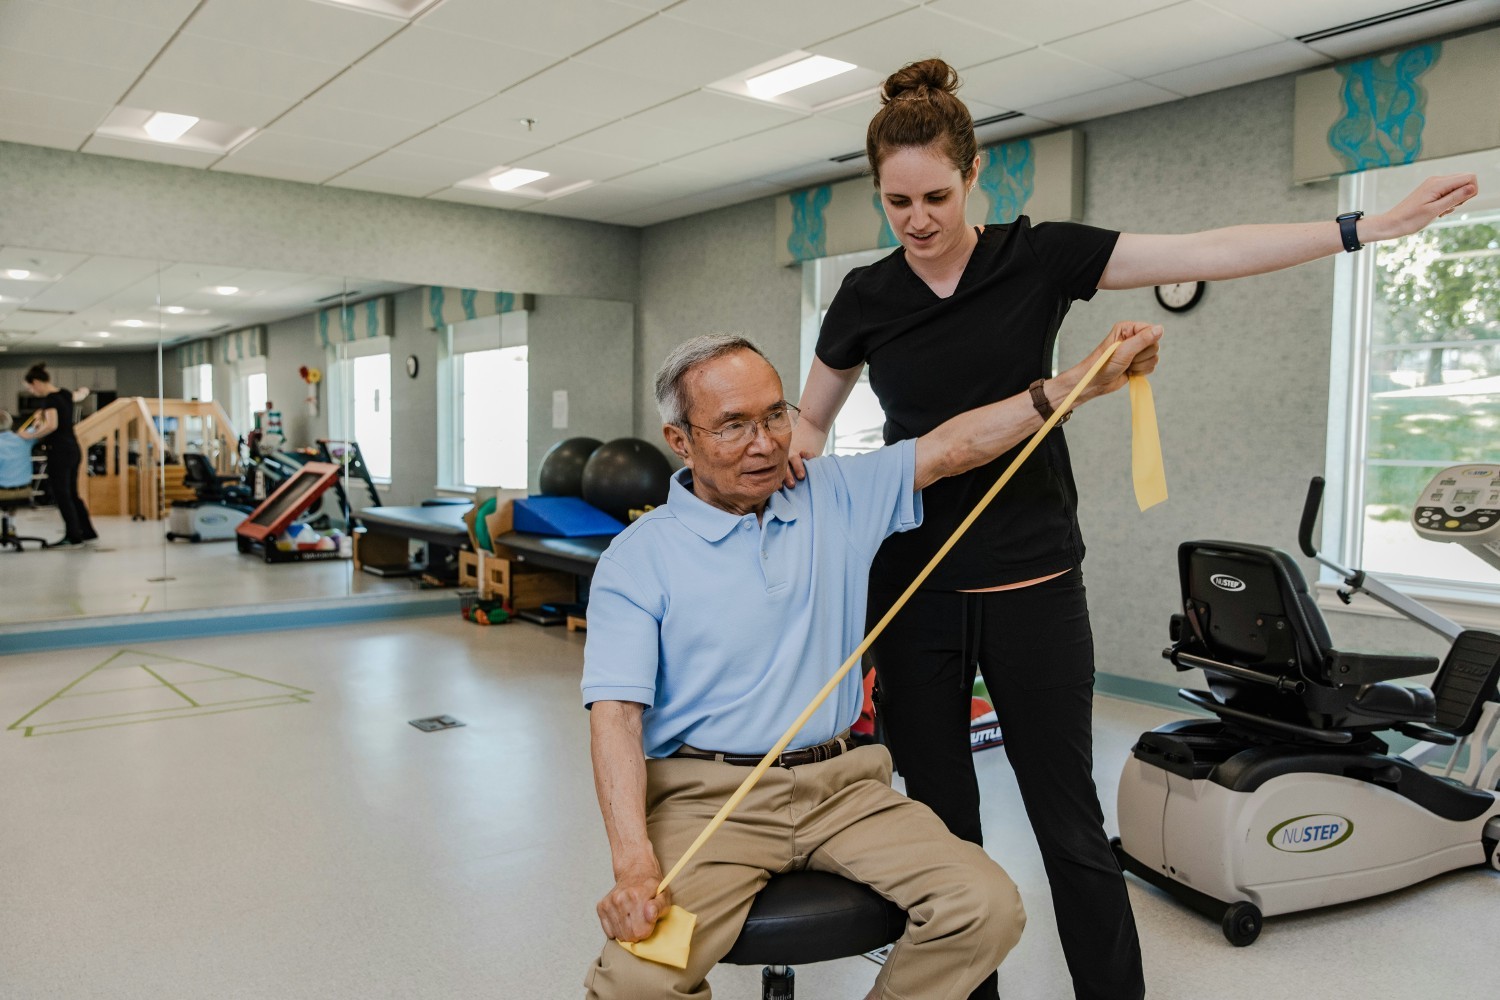 Skilled Nursing residents recover from surgery, illness, or a fall with our on-site rehabilitation.